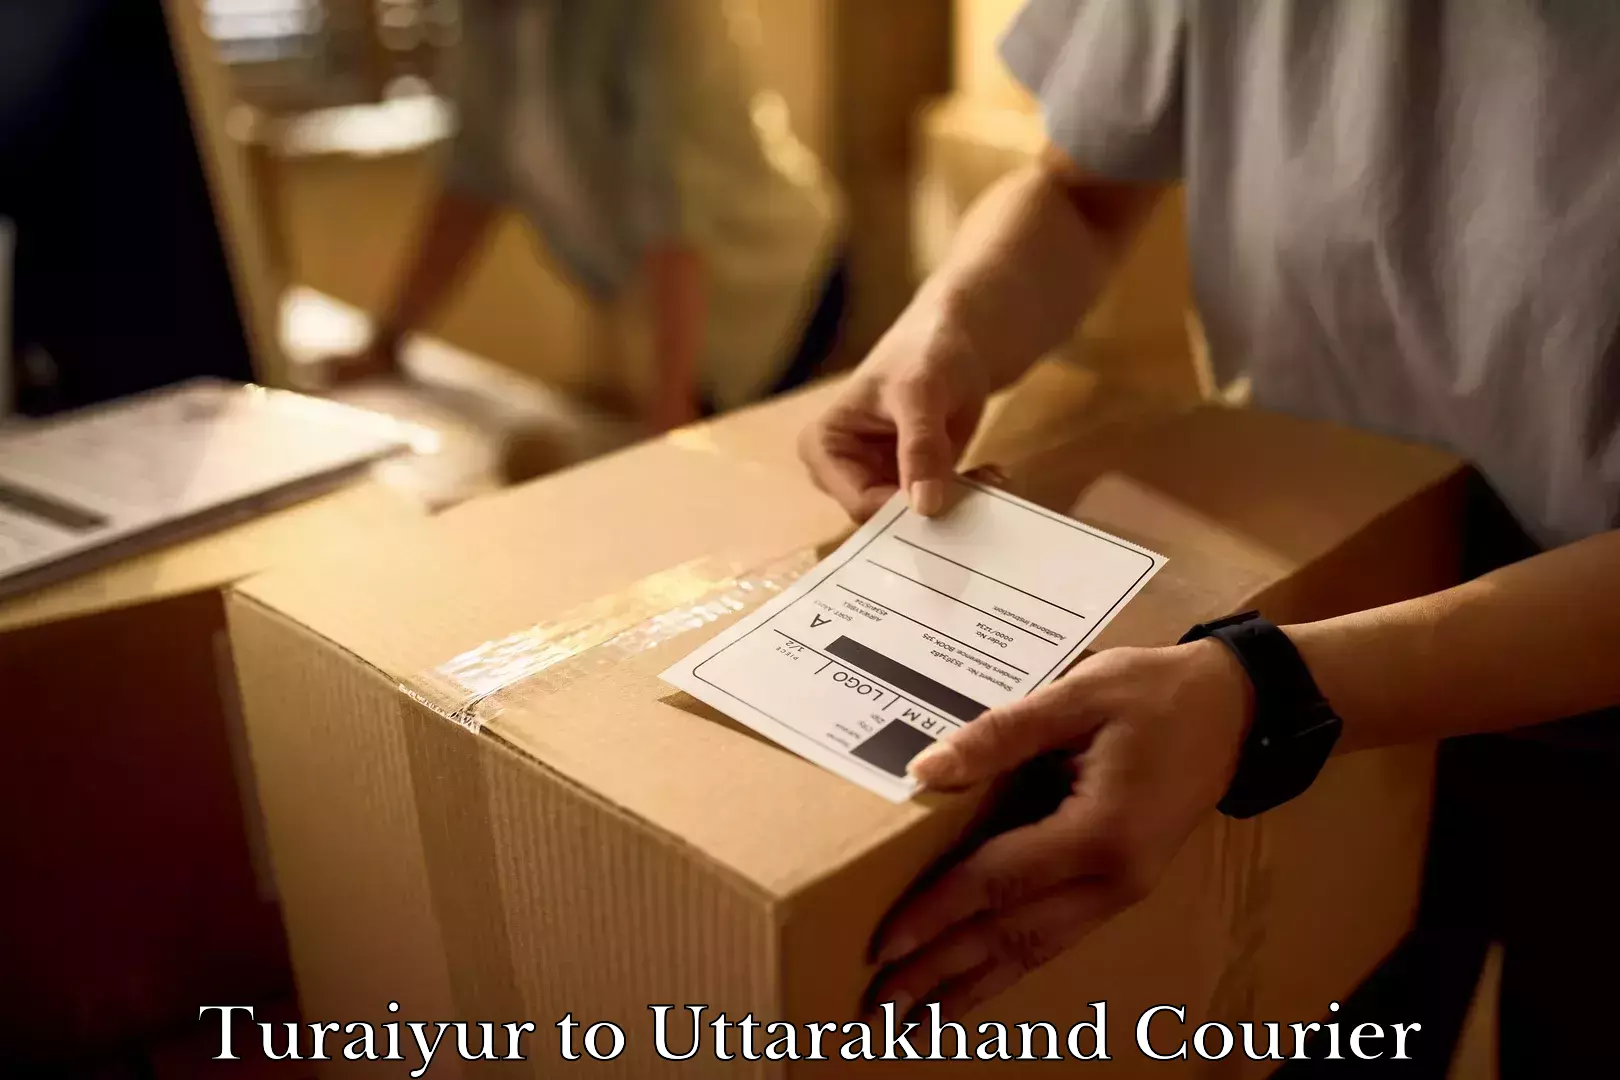 Furniture relocation experts Turaiyur to Pauri Garhwal